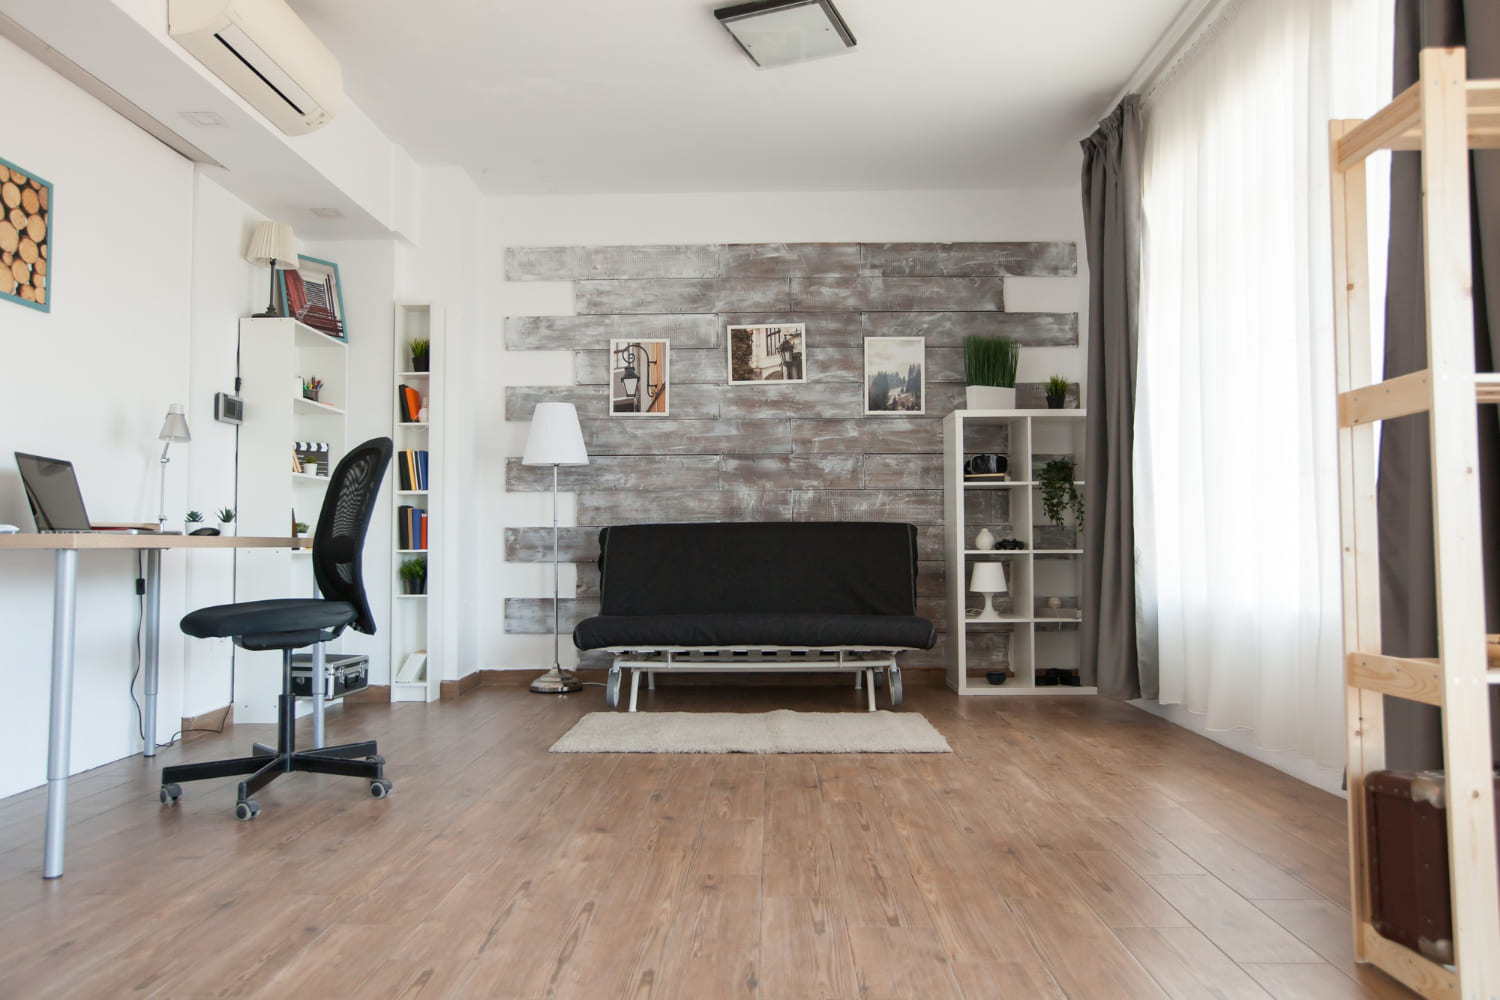 Reasons Why Luxury Vinyl Flooring is Perfect for Your Brampton Home